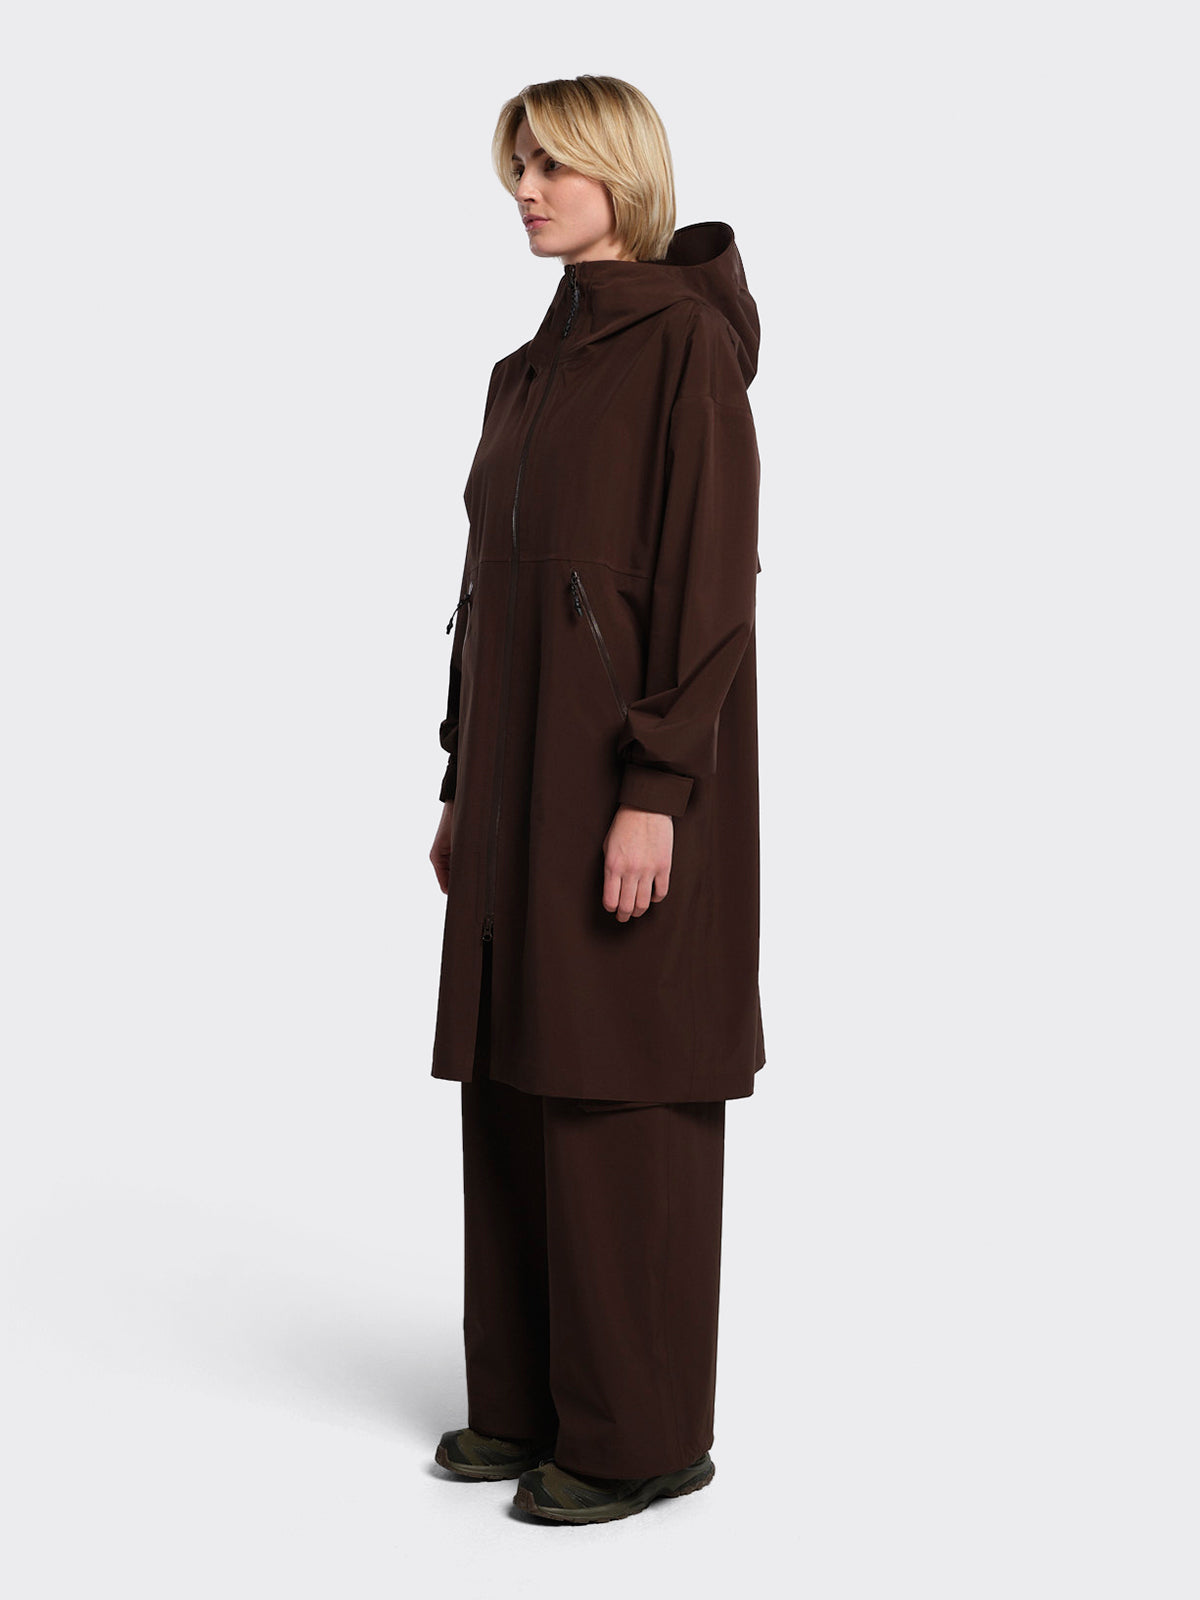 Woman wearing Rovde coat by blæst in the color Java